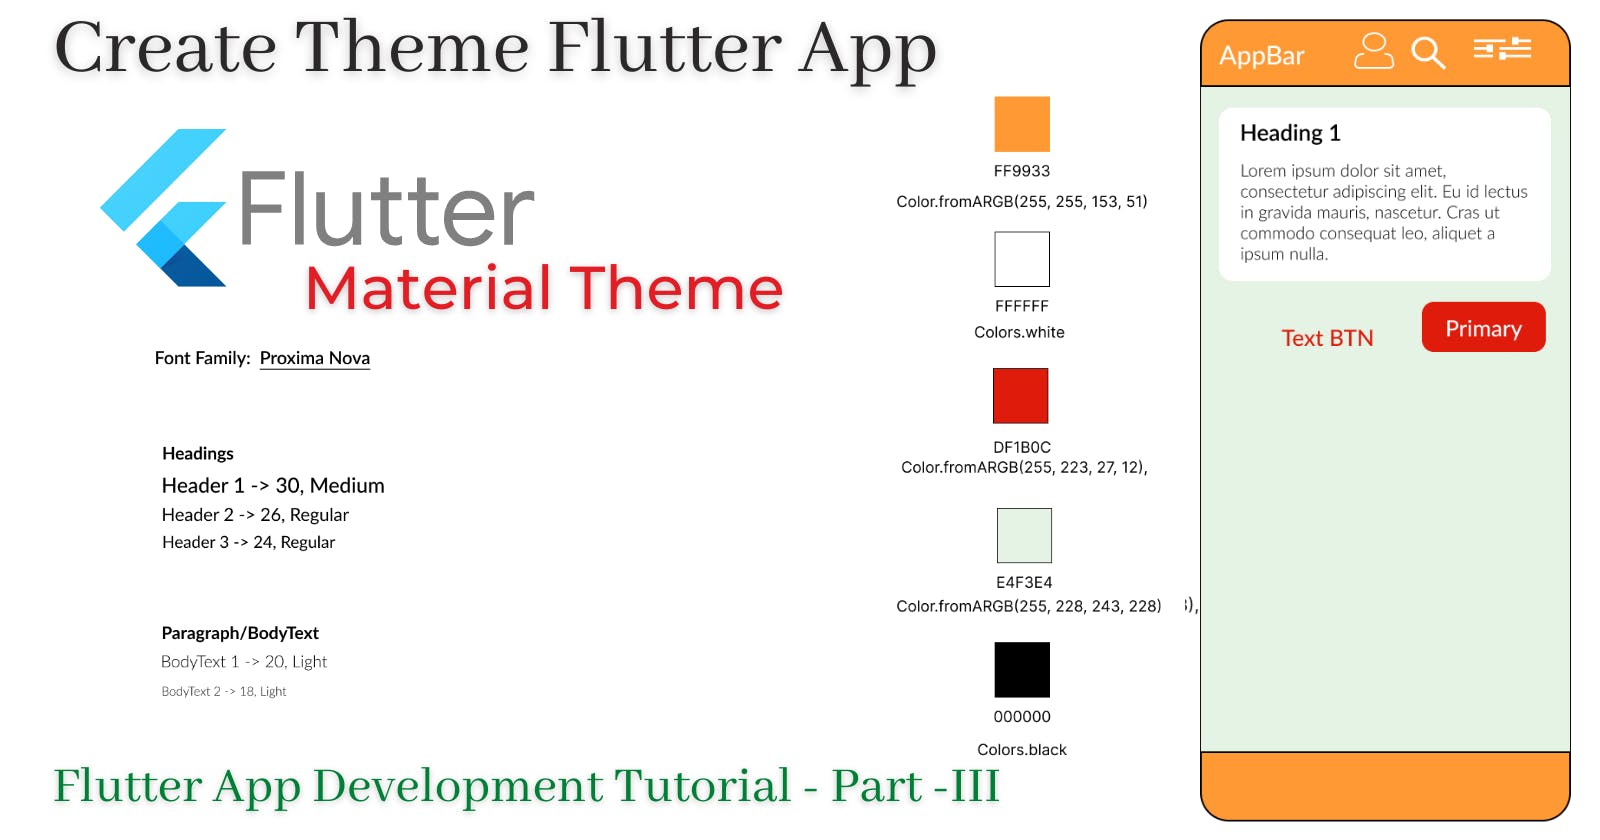 How to Define A Flutter Theme?